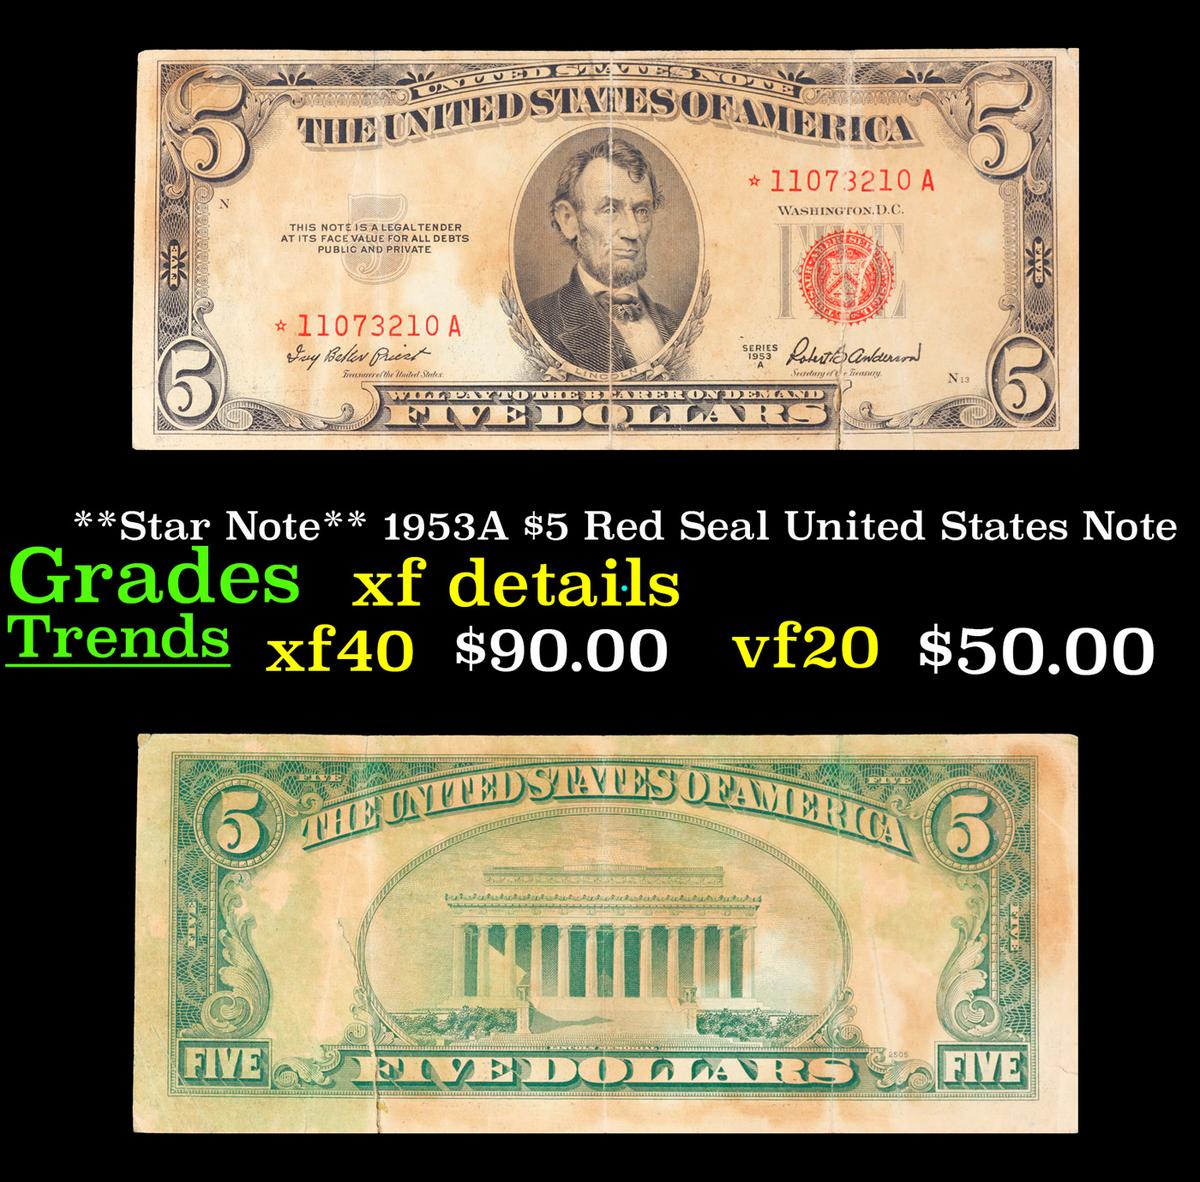 **Star Note** 1953A $5 Red Seal United States Note Grades xf details